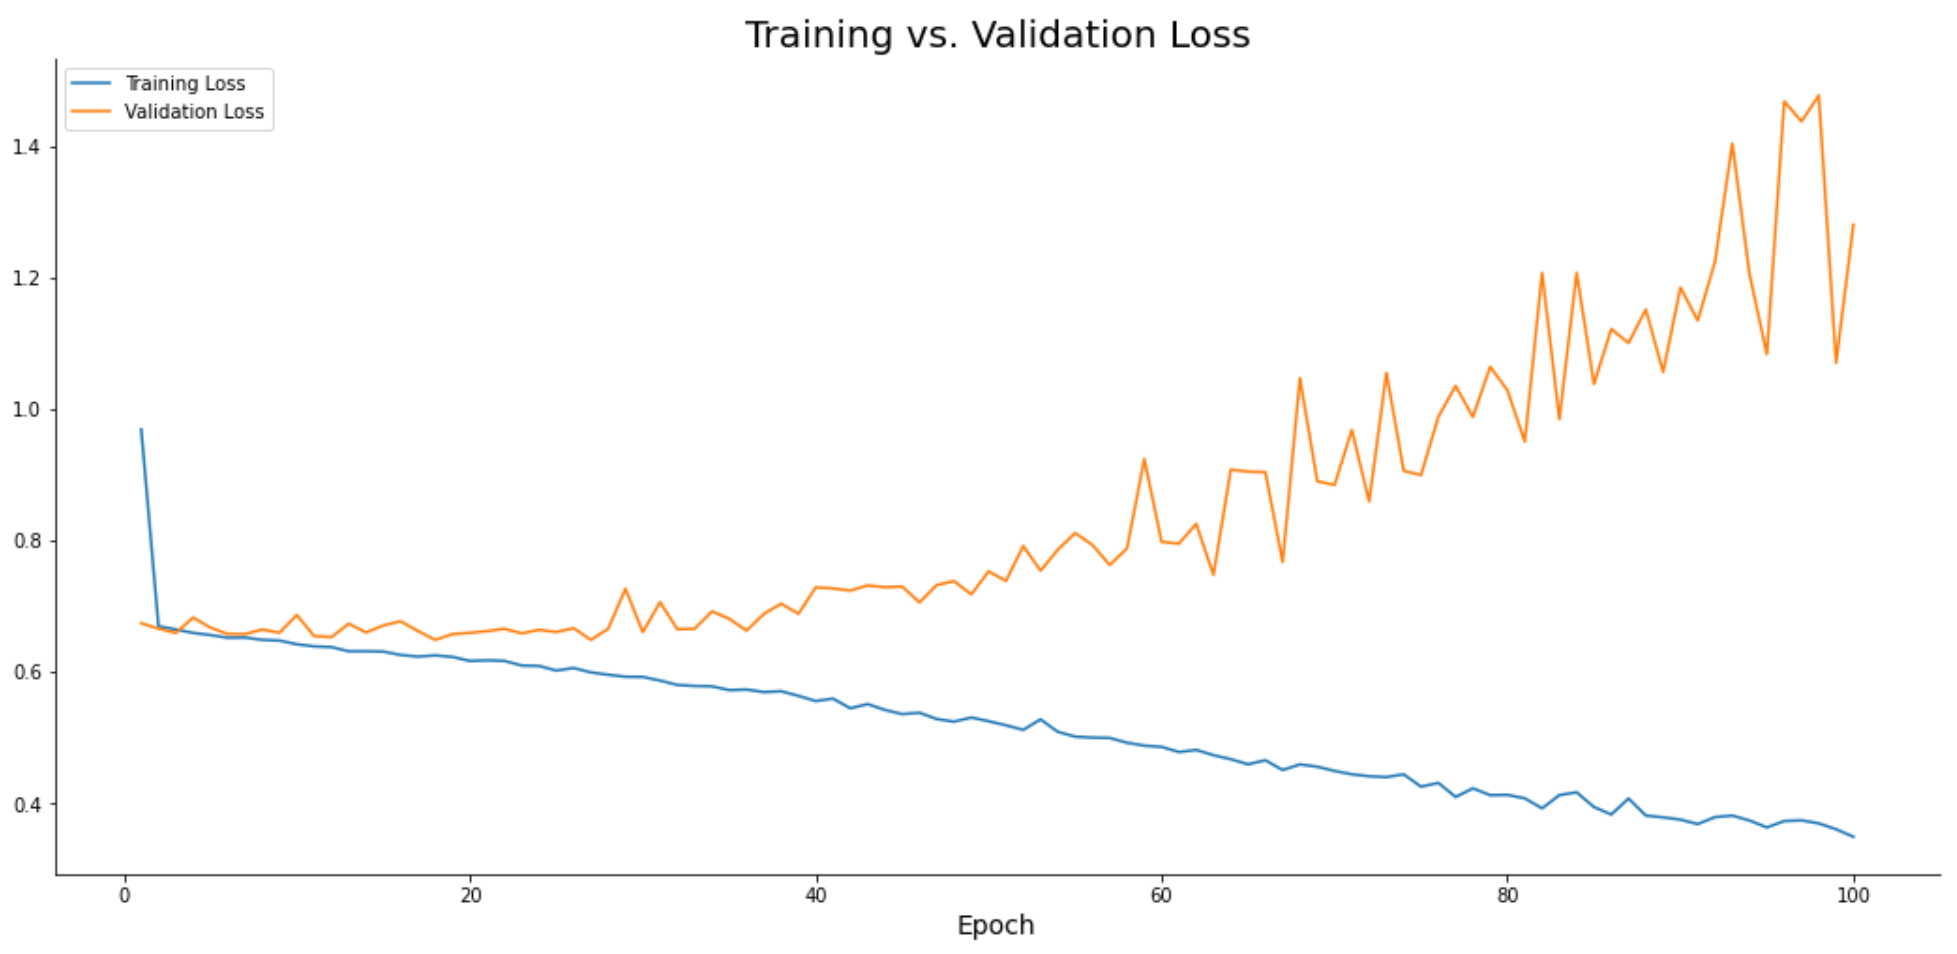 Image 13 — Training loss vs. validation loss (image by author)